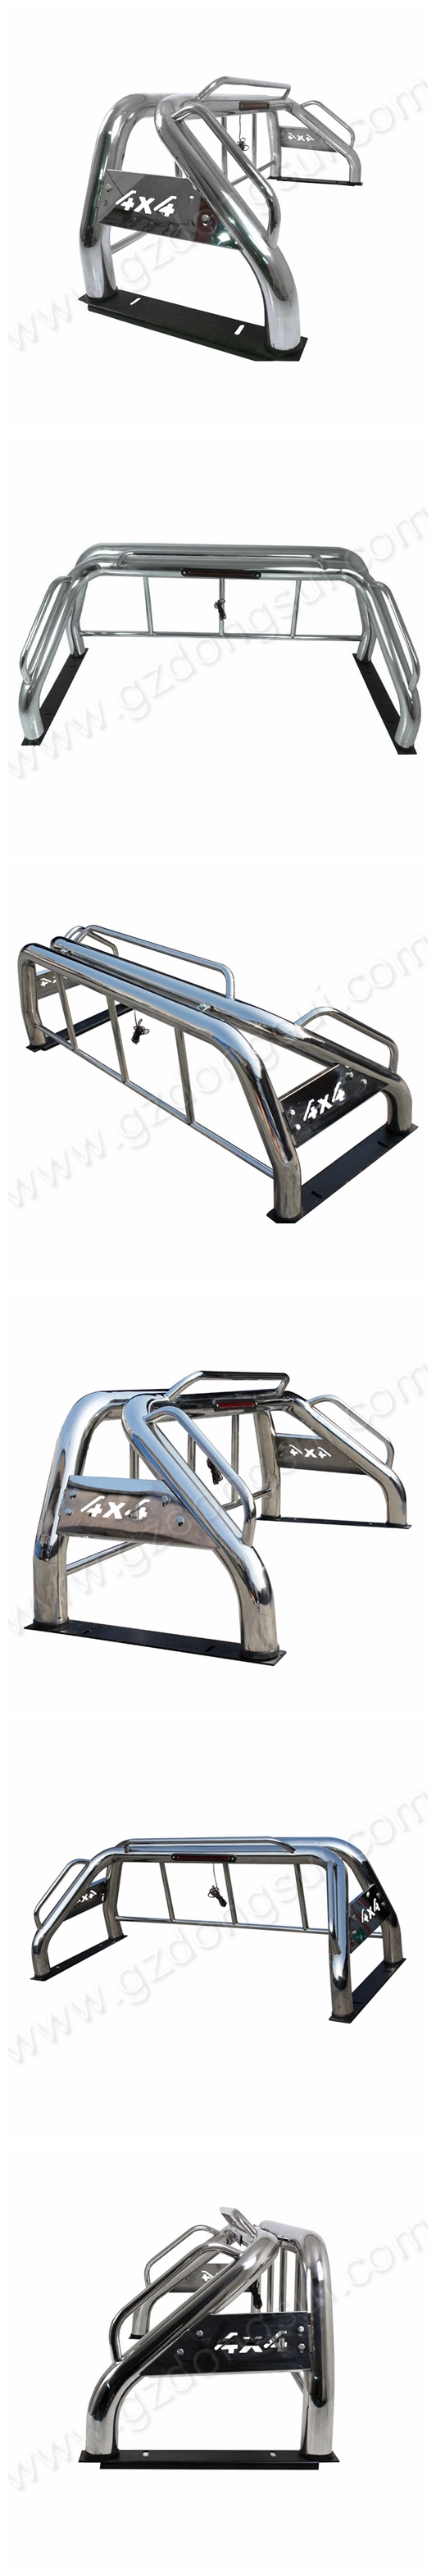 Sports Roll Bar for 4X4 Truck